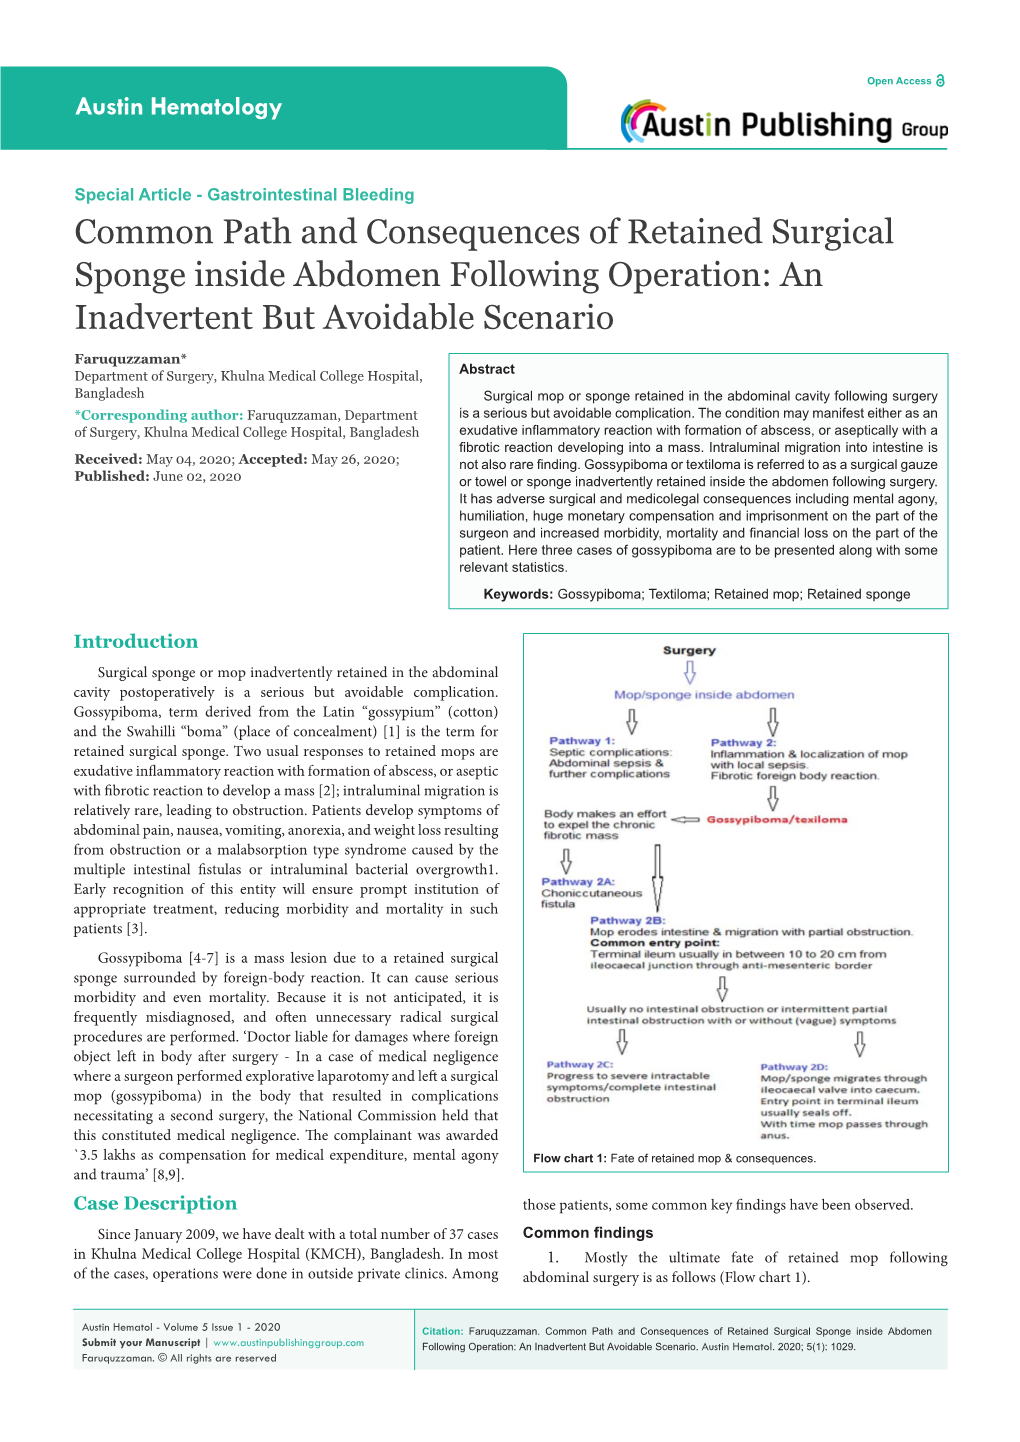 Common Path and Consequences of Retained Surgical Sponge Inside Abdomen Following Operation: an Inadvertent but Avoidable Scenario